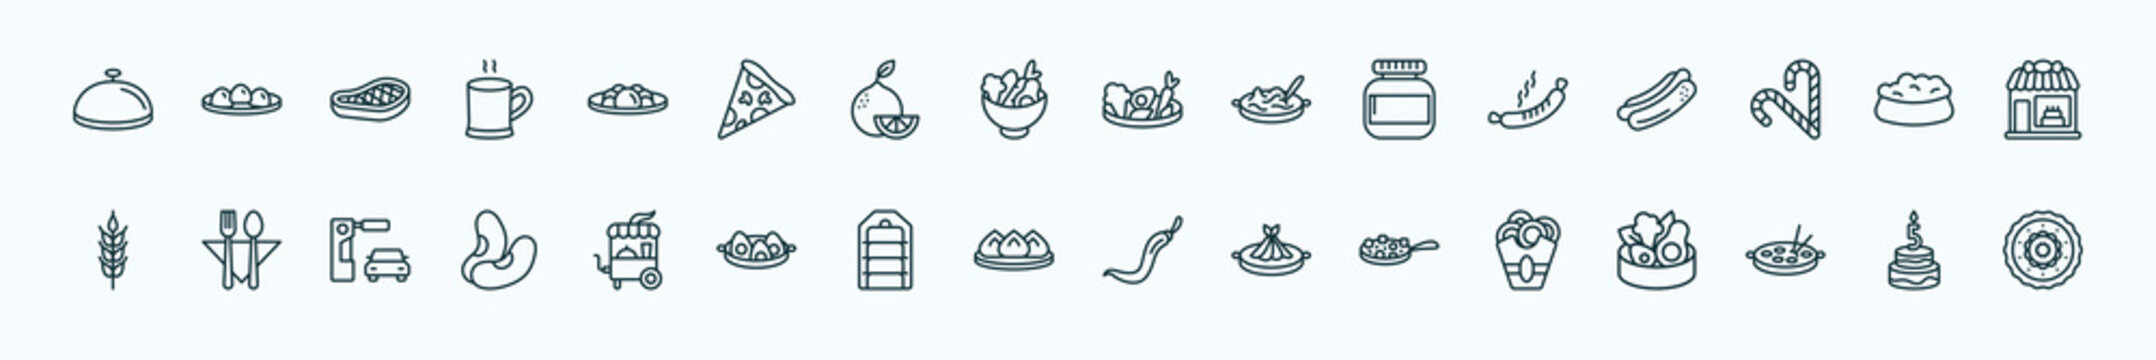 Special Lineal Food And Restaurant Icons Set. Outline Icons Such As Salver, Yusheng, Vegetarian Food, Sausages, Dog Food, Bistro, Fair, Wonton, Buddhas Delight, Oyster Omelette, Five Birthday Cake